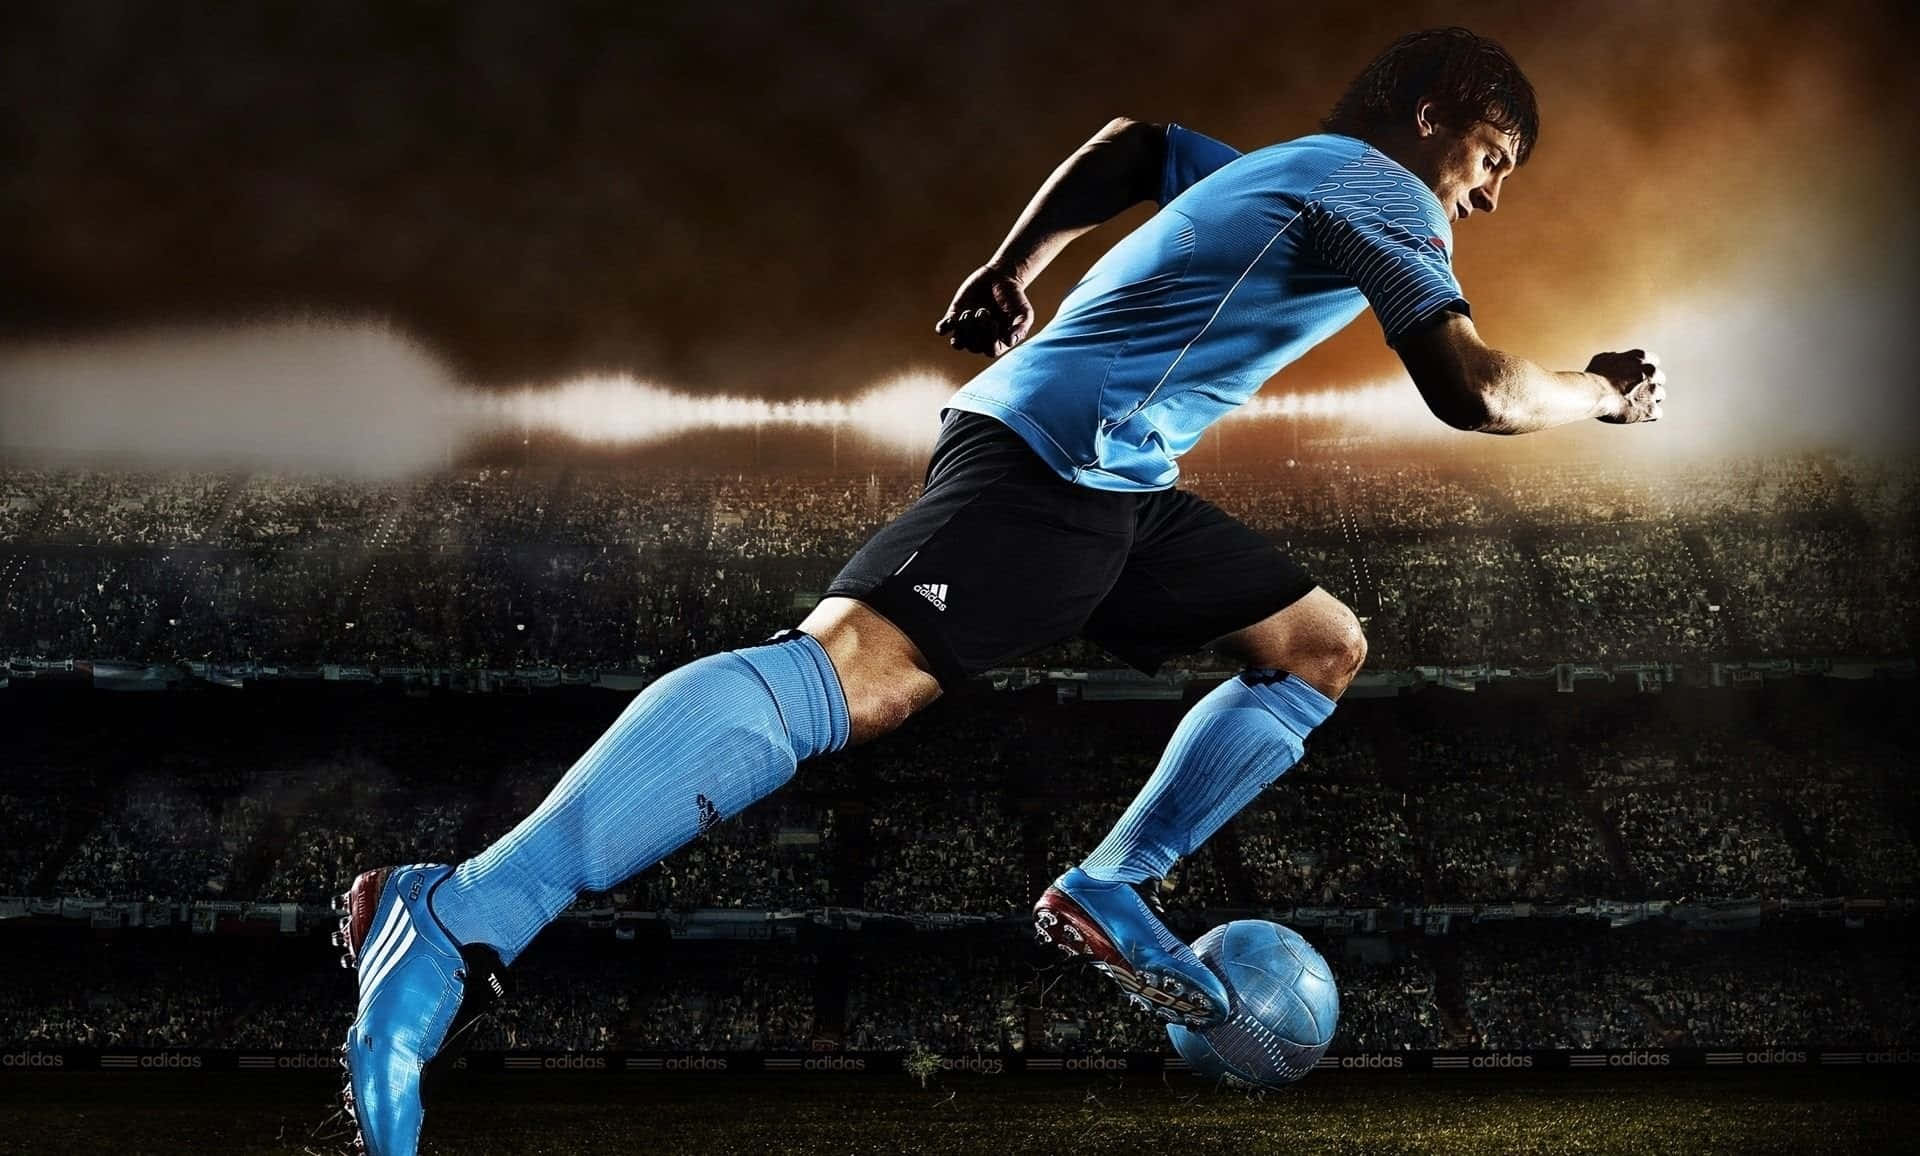 Professional Football Players Showing Off Their Skills Wallpaper